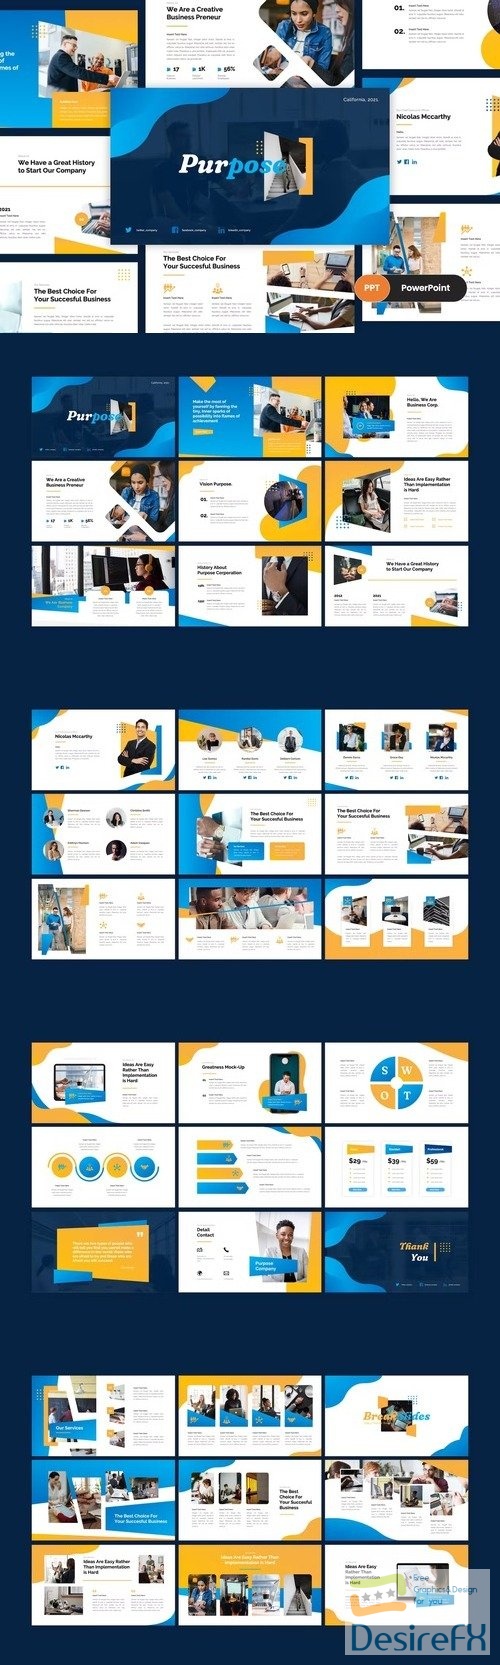 Purpose - Business PowerPoint Template